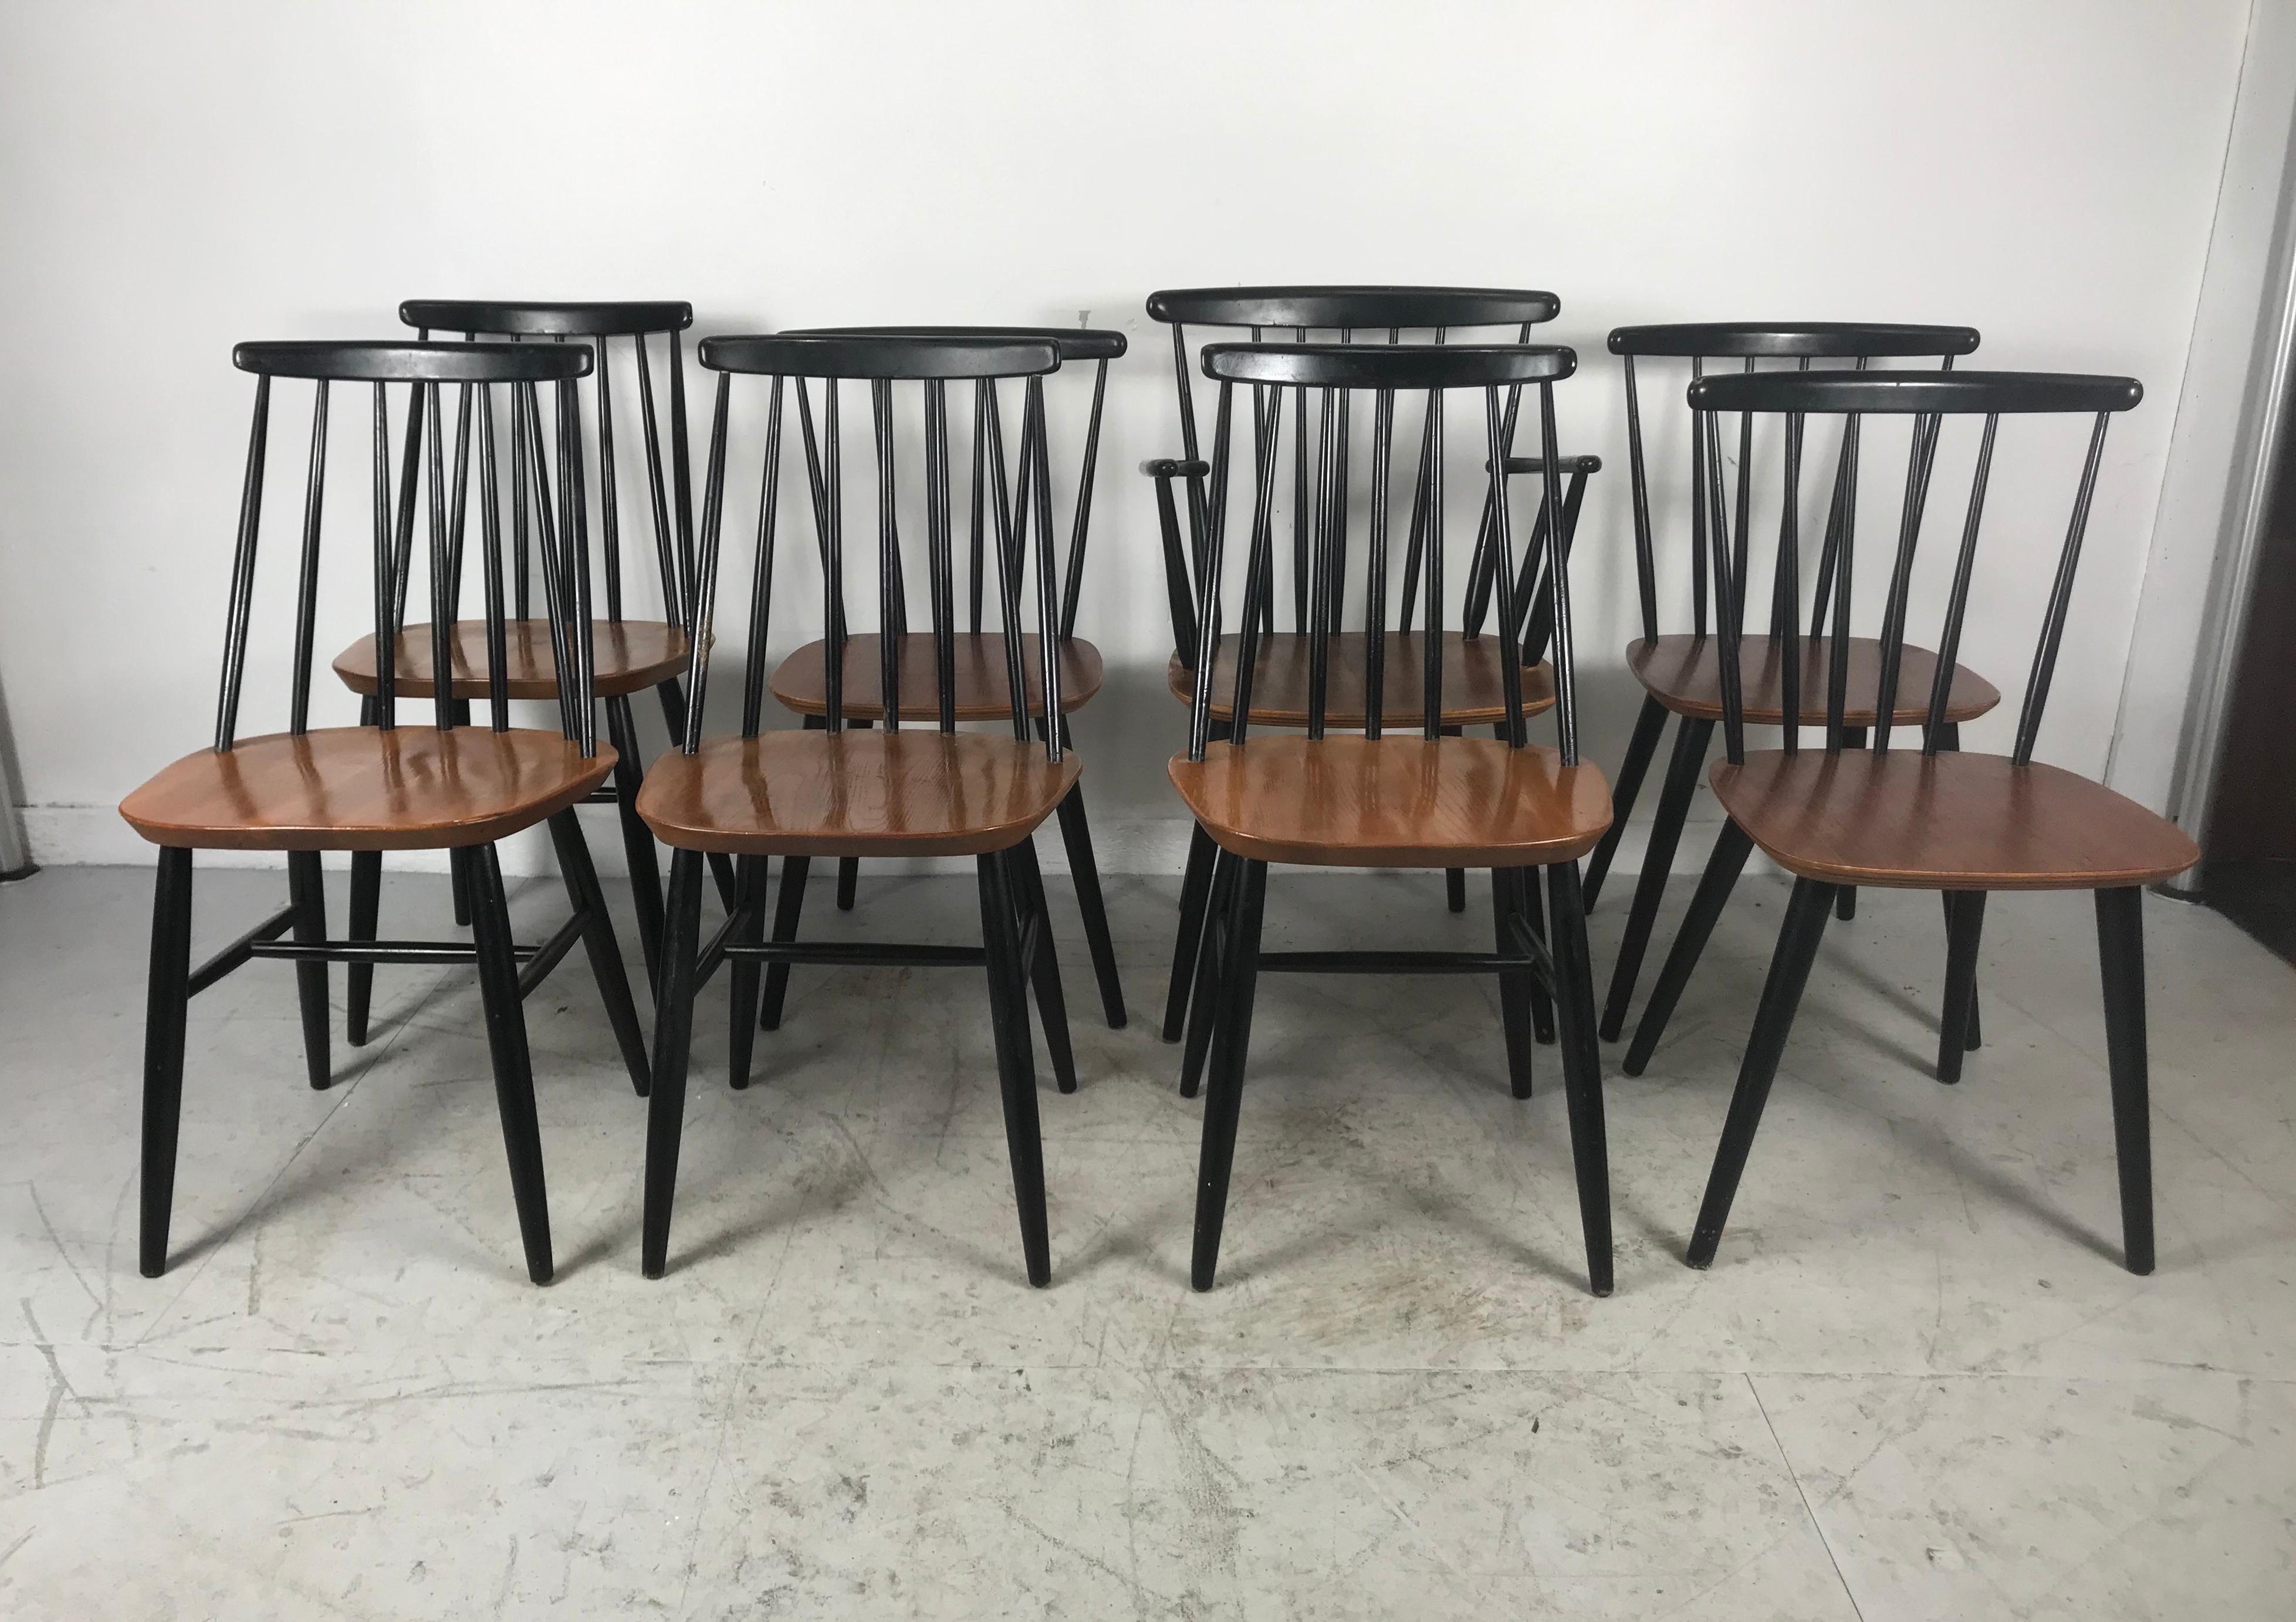 Set of eight stick back Scandinavian dining chairs by Thomas Harlev for Farstrup. Made in Denmark. Stained beechwood and ply. Set consists of seven side chairs and one arm chair. Quality, sturdy construction, retain original finish, minor scuffing,